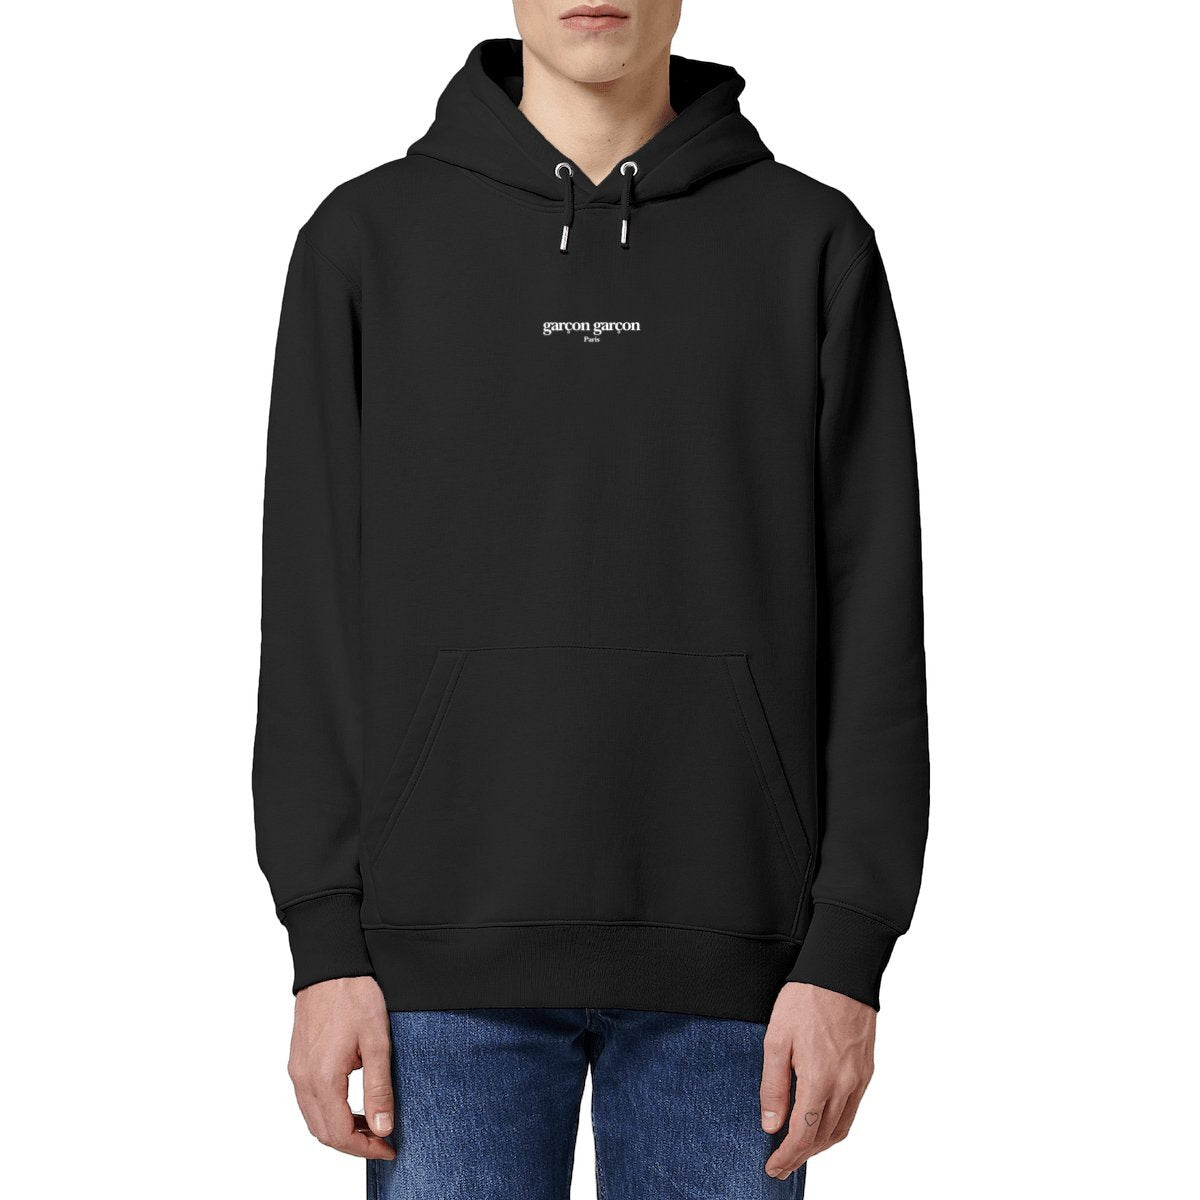 garçon garçon essentiel black hoodie. Sleek in black and whispering Parisian chic, this hoodie is the sartorial whisper of 'garçon garçon' — a statement of understated elegance. Perfect for those who carry a piece of Paris in their hearts and a touch of audacity on their sleeves.